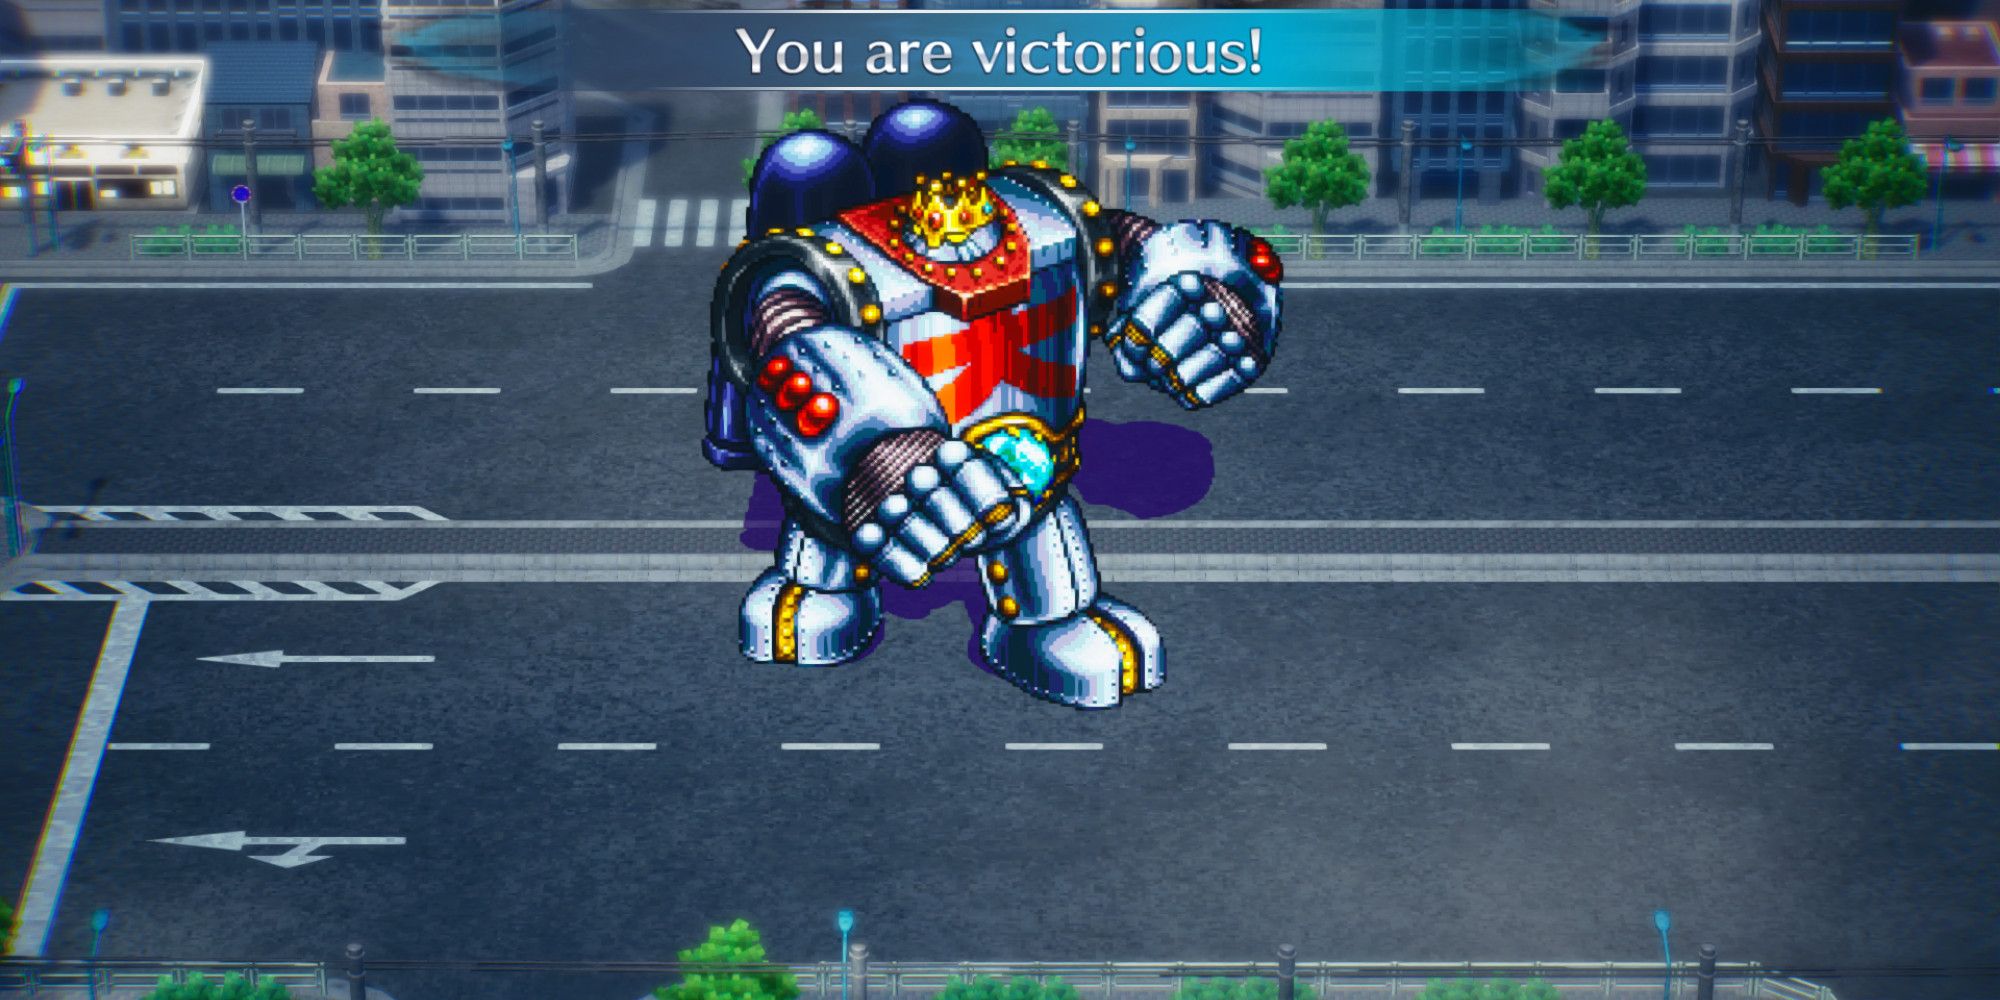 Live A Live - Victory King Robot